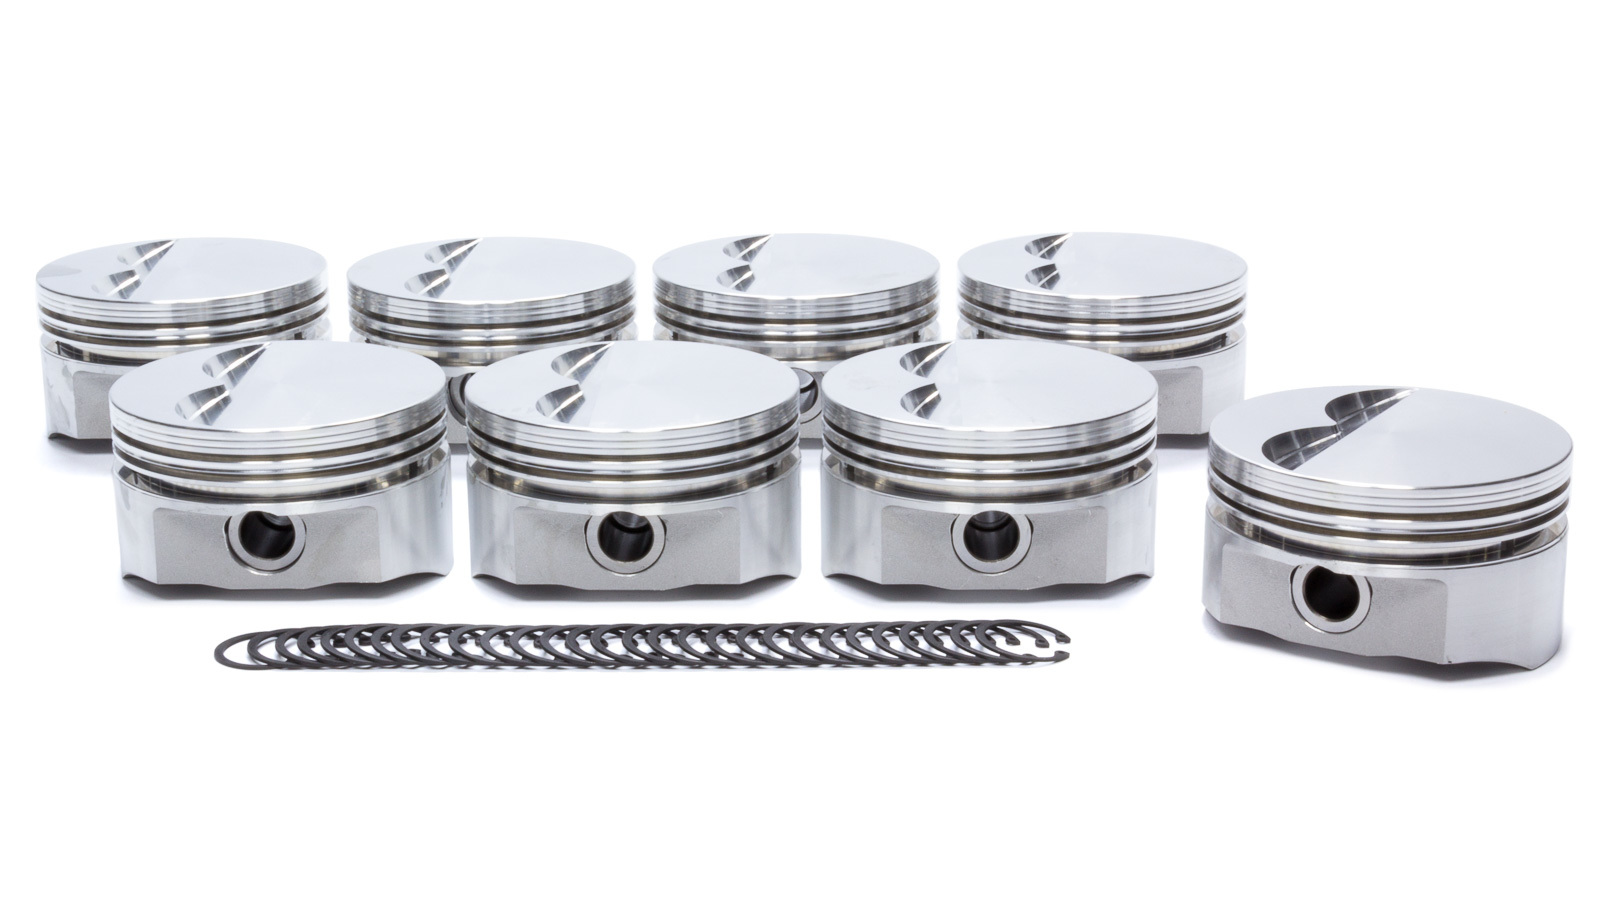 DSS Racing 8710-4040 Piston, E Series, Forged, 4.040 in Bore, 5/64 x 5/64 x 3/16 in Ring Grooves, Minus 5.00 cc, Small Block Chevy, Set of 8